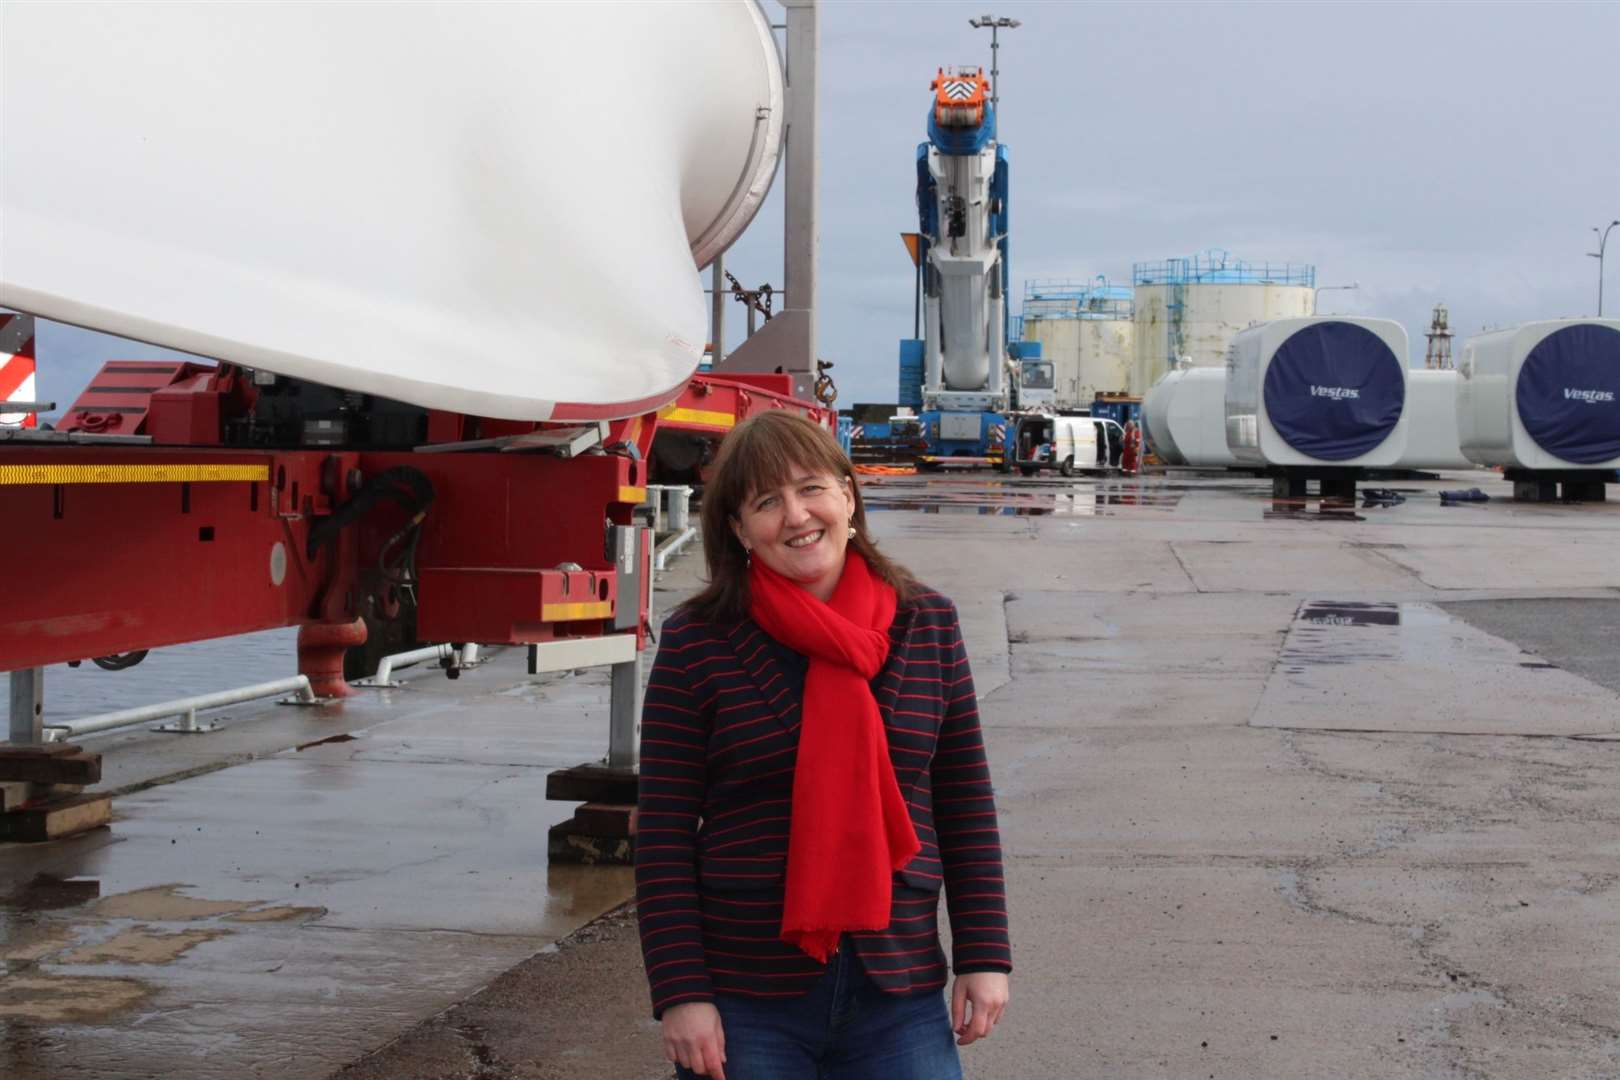 Maree Todd beside wind turbine parts at Wick. She says the new report on renewable jobs across Scotland is very encouraging for her constituency and the wider Highlands.